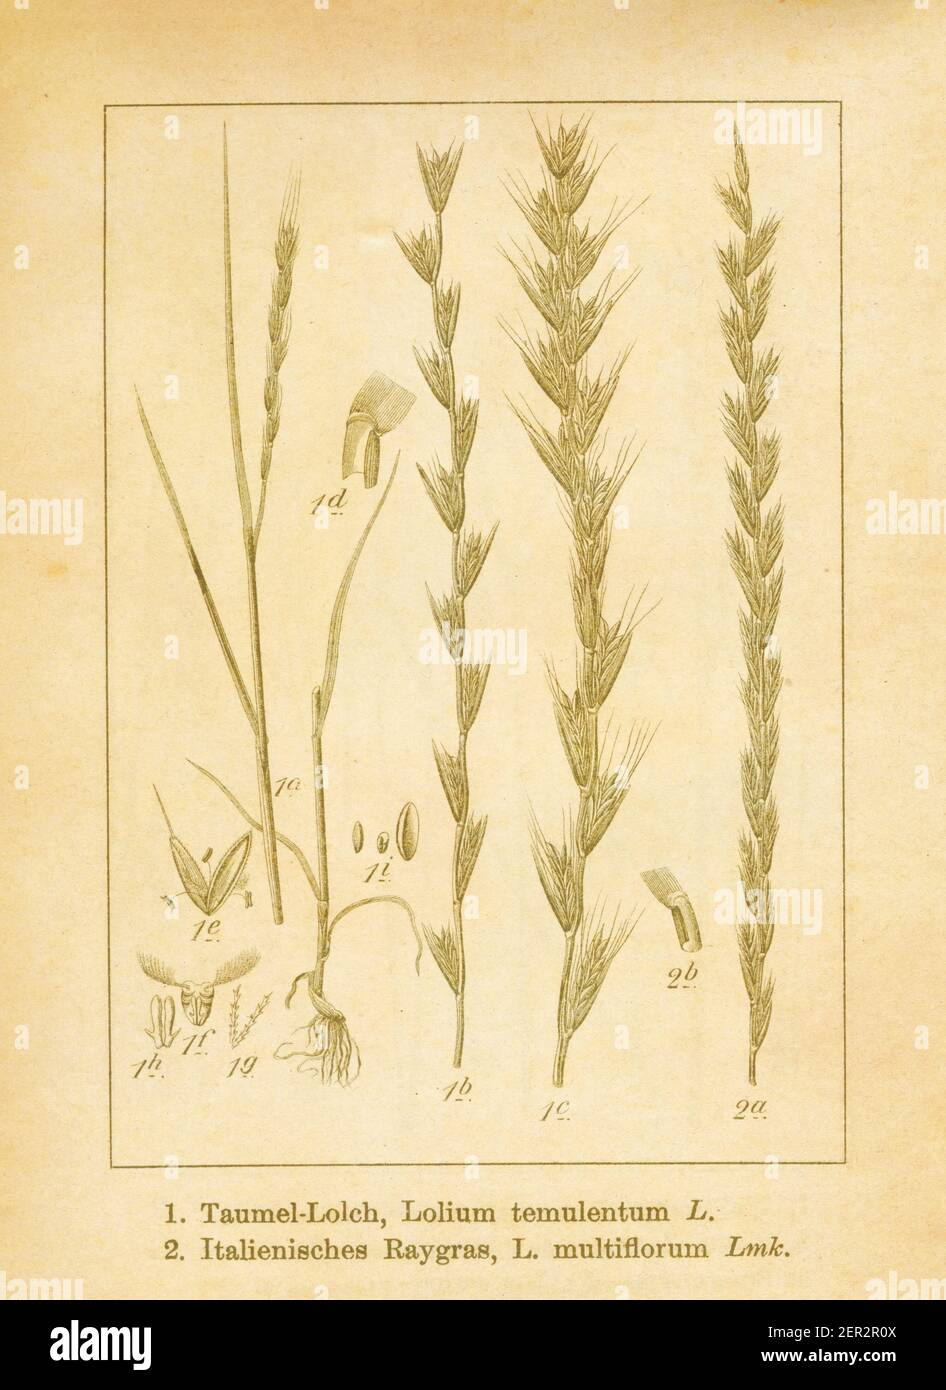 Antique illustration of lolium temulentum (also known as darnel ryegrass, darnel or cockle) and lolium multiflorum (also known as Italian ryegrass, an Stock Photo